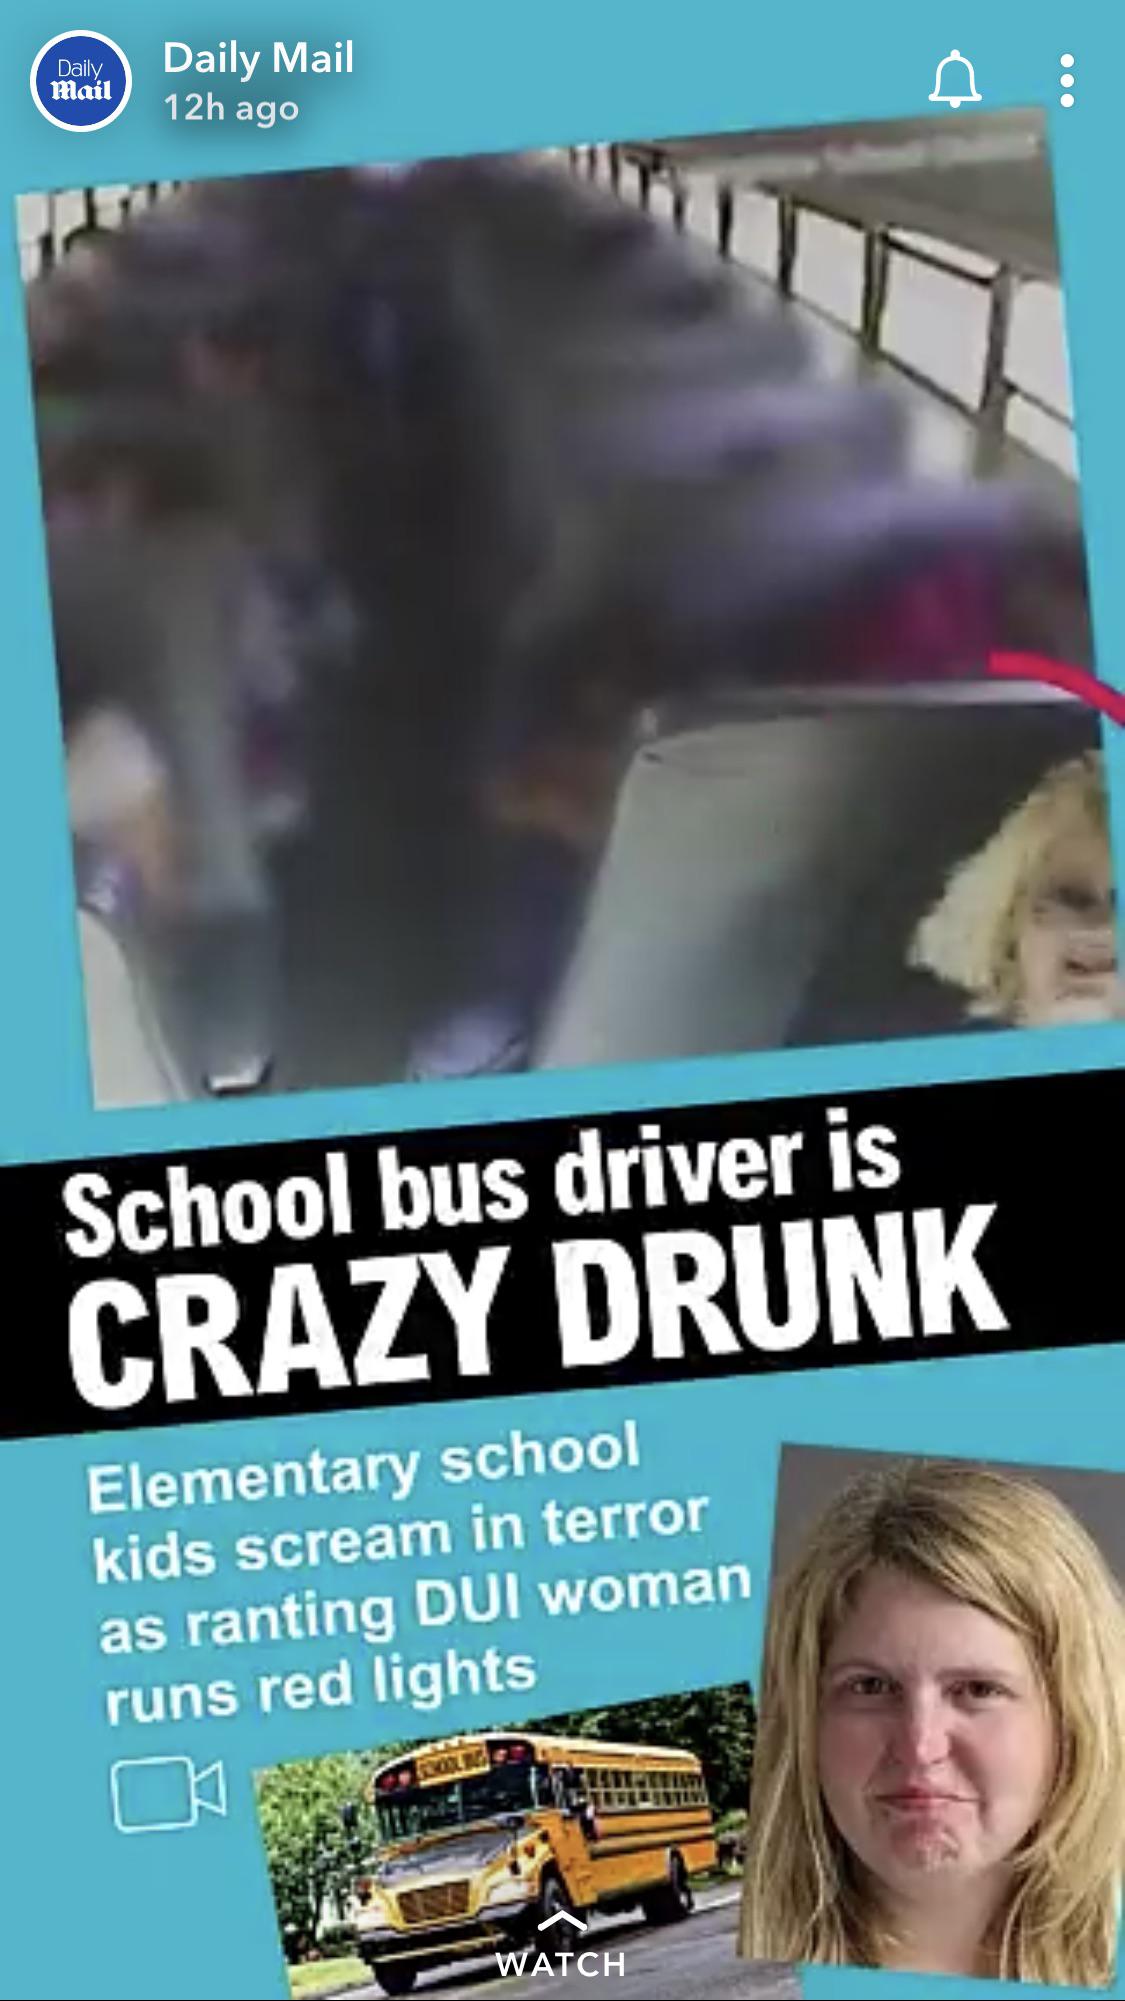 poster - Daily Daily Mail Mail 12h ago School bus driver is Crazy Drunk Elementary school kids scream in terror as ranting Dui woman runs red lights 10IV Watch